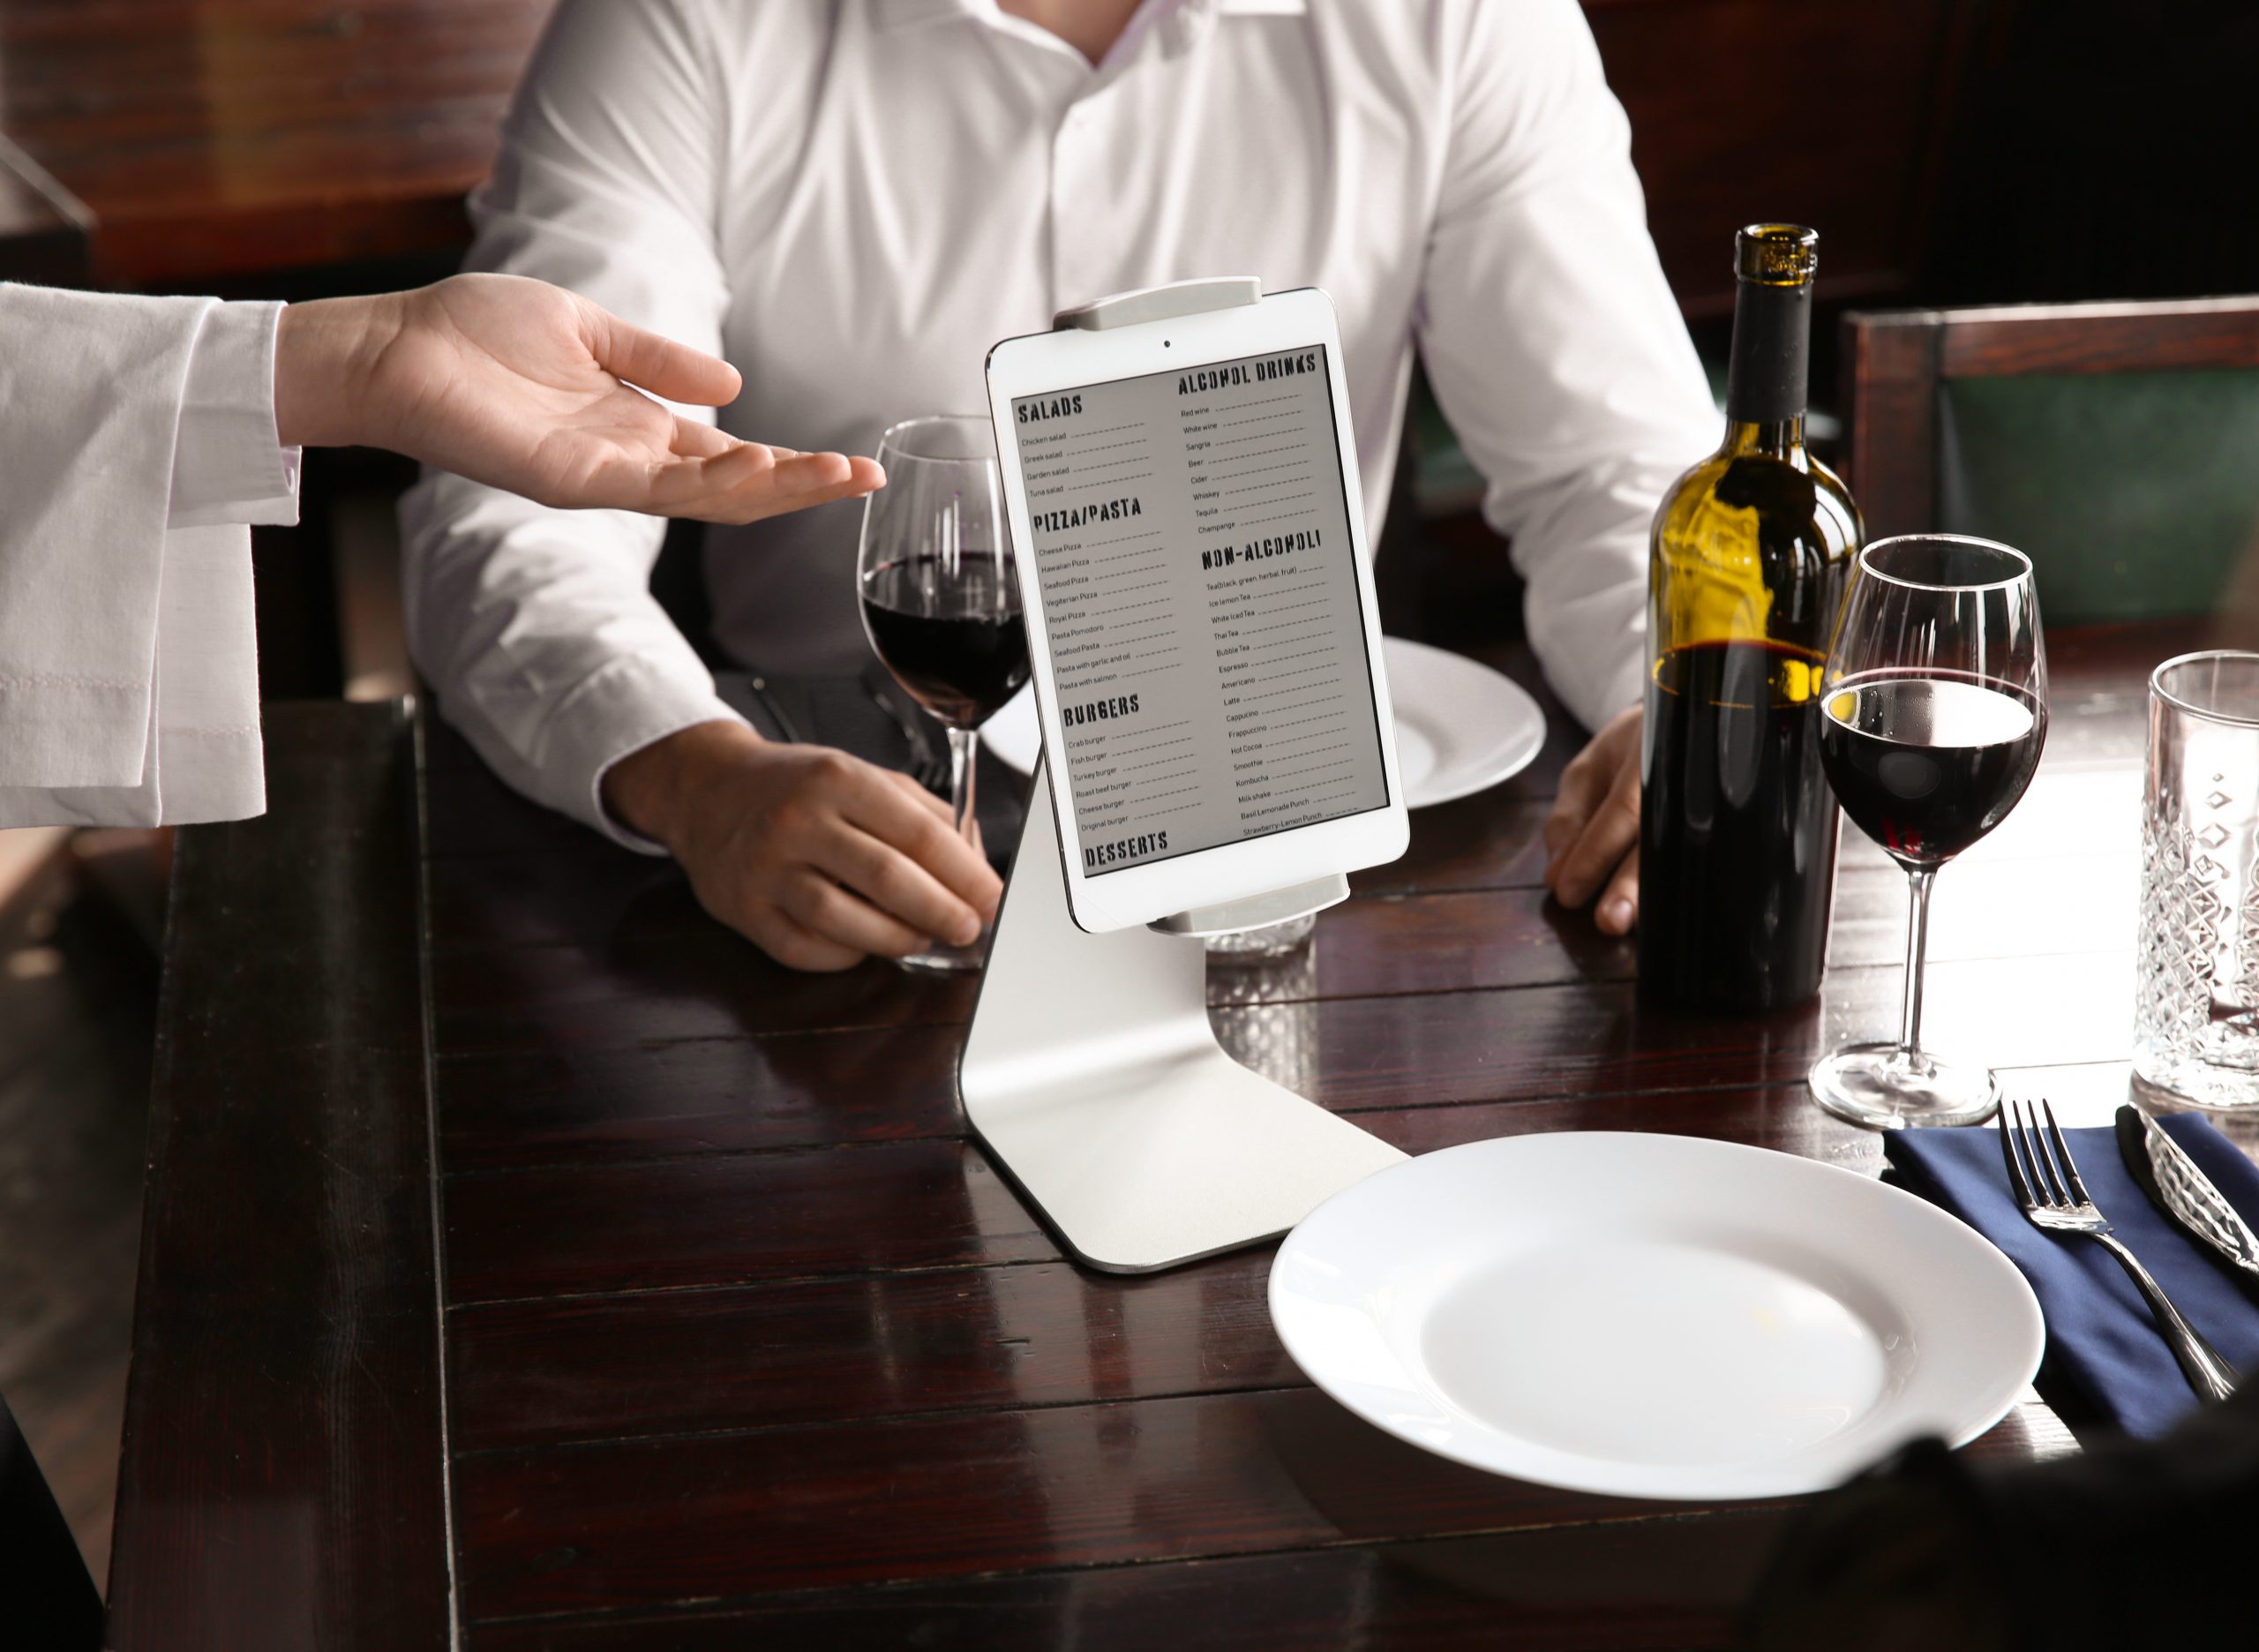 Tablet displaying menu using software for hospitality industry